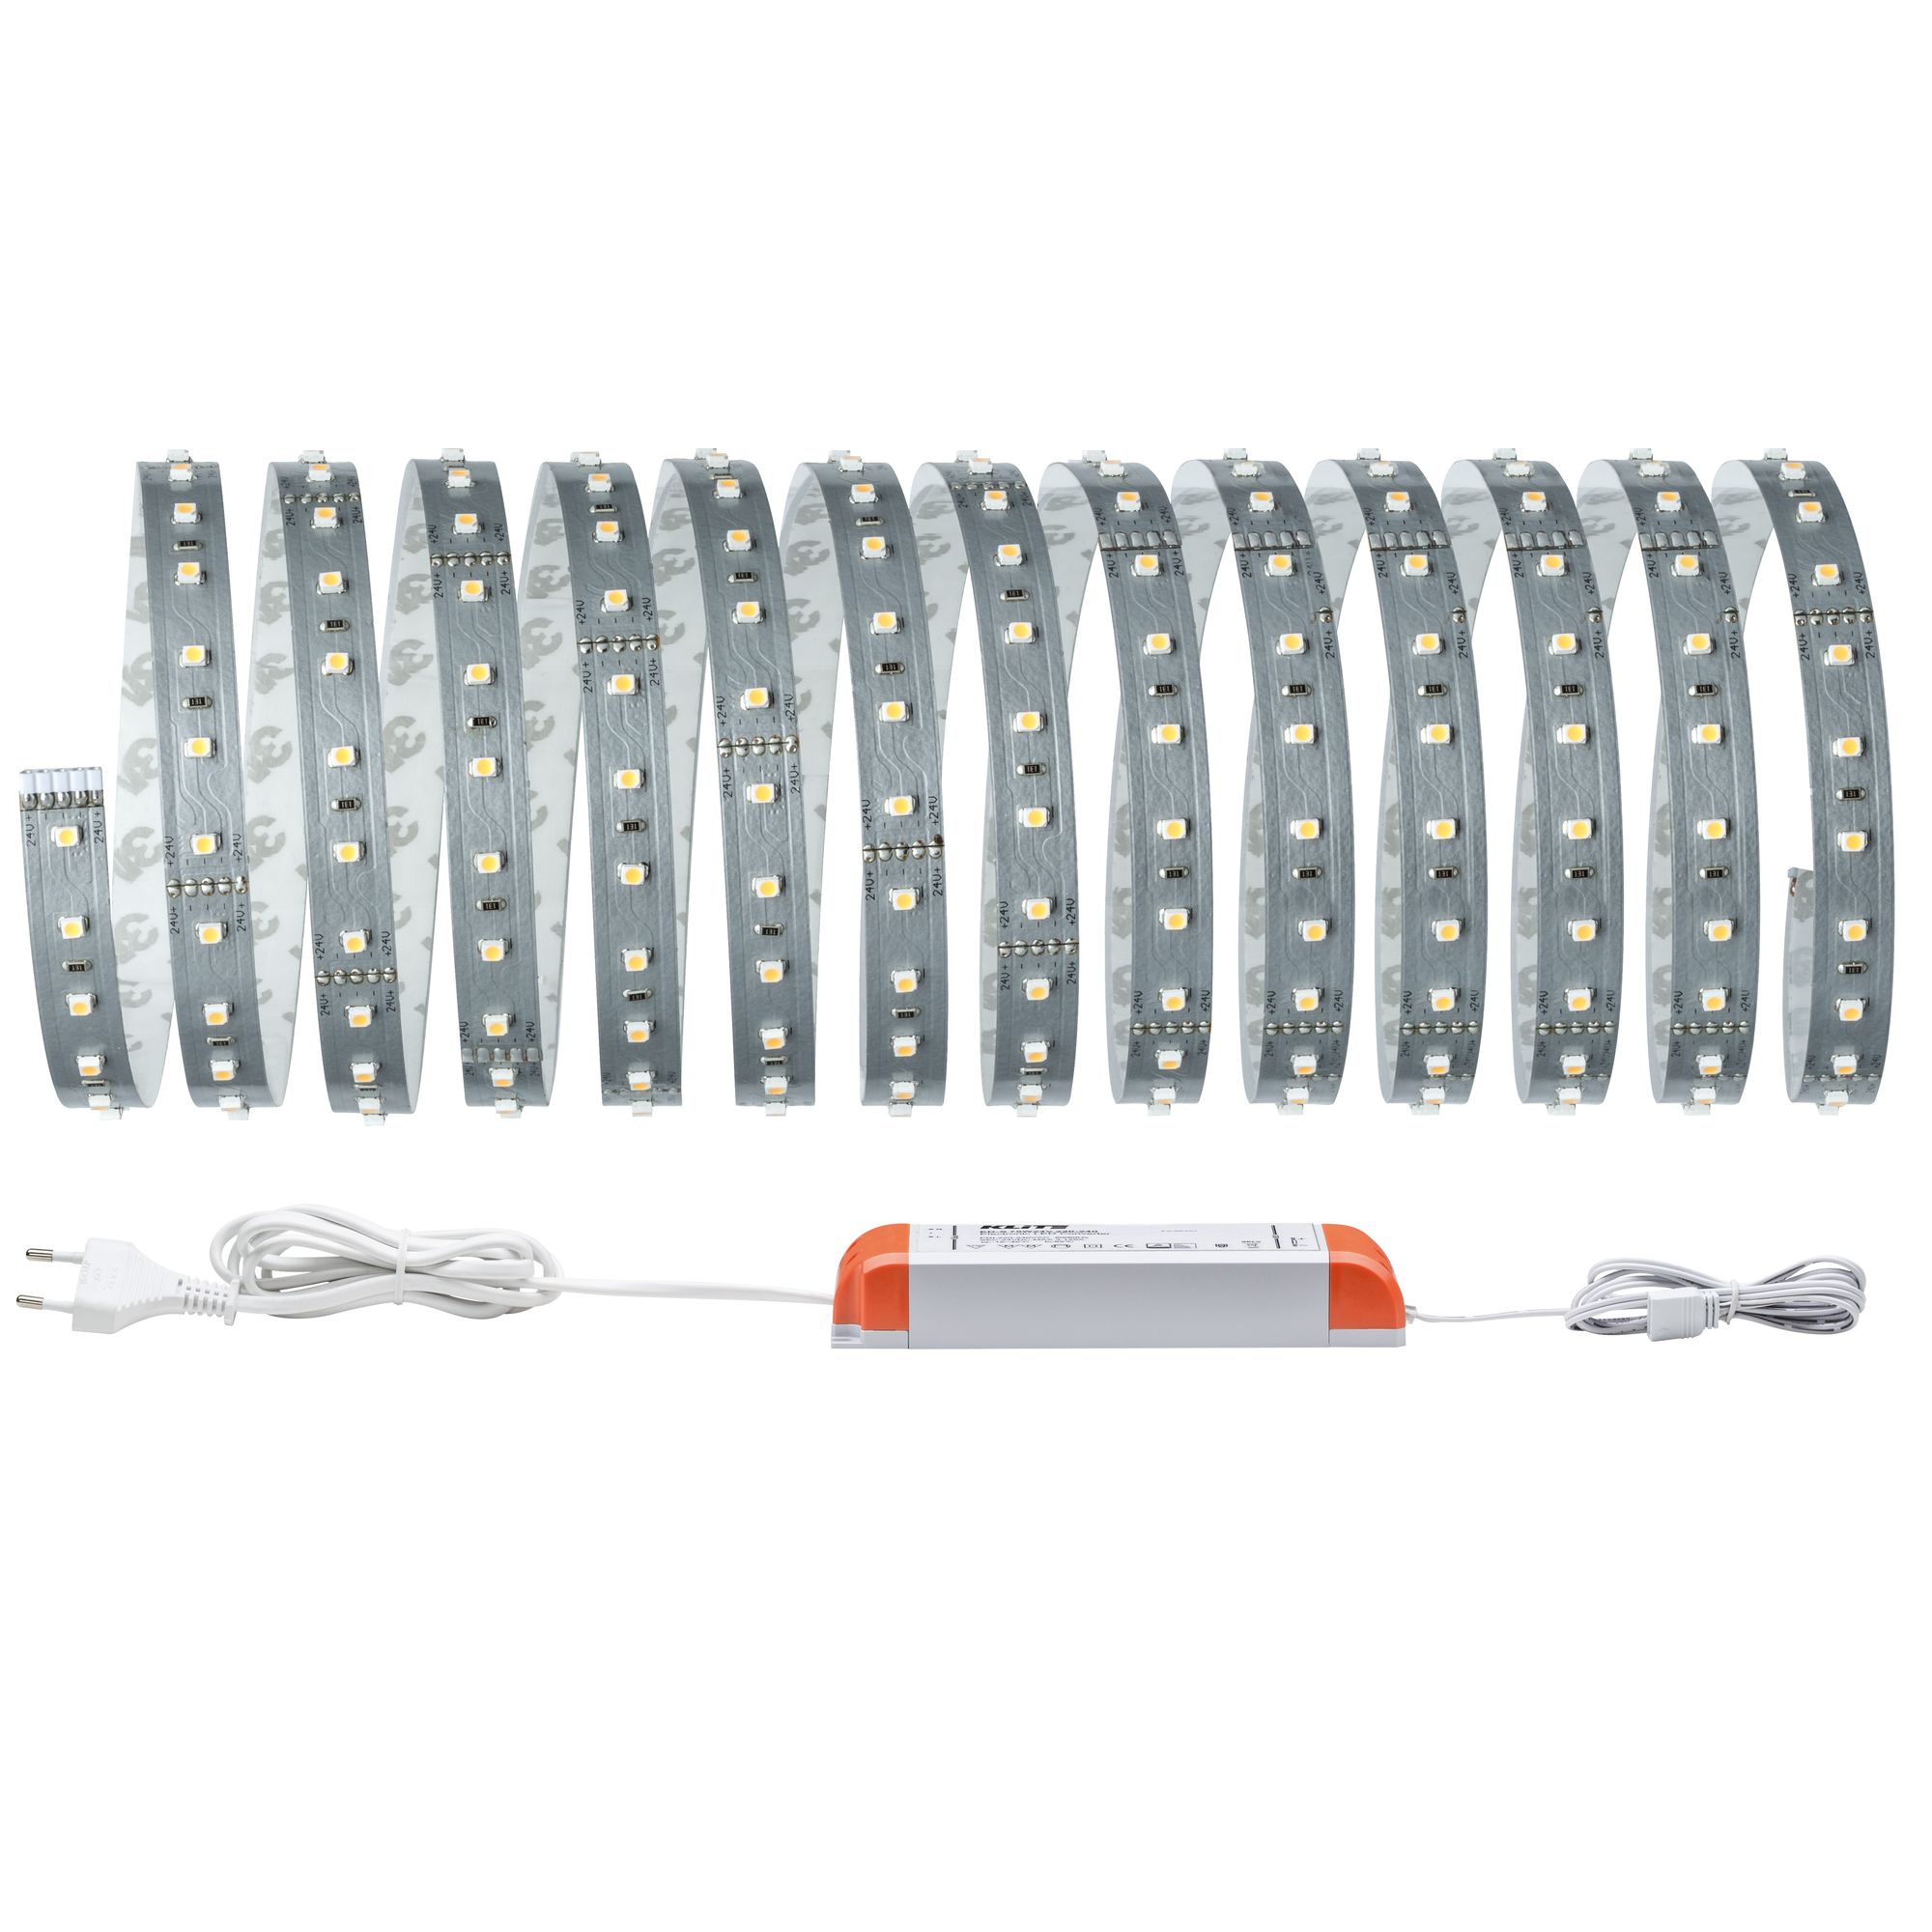 LED-Basisset 'MaxLED' 5 m 30 W 2750 lm warmweiß, silber + product picture